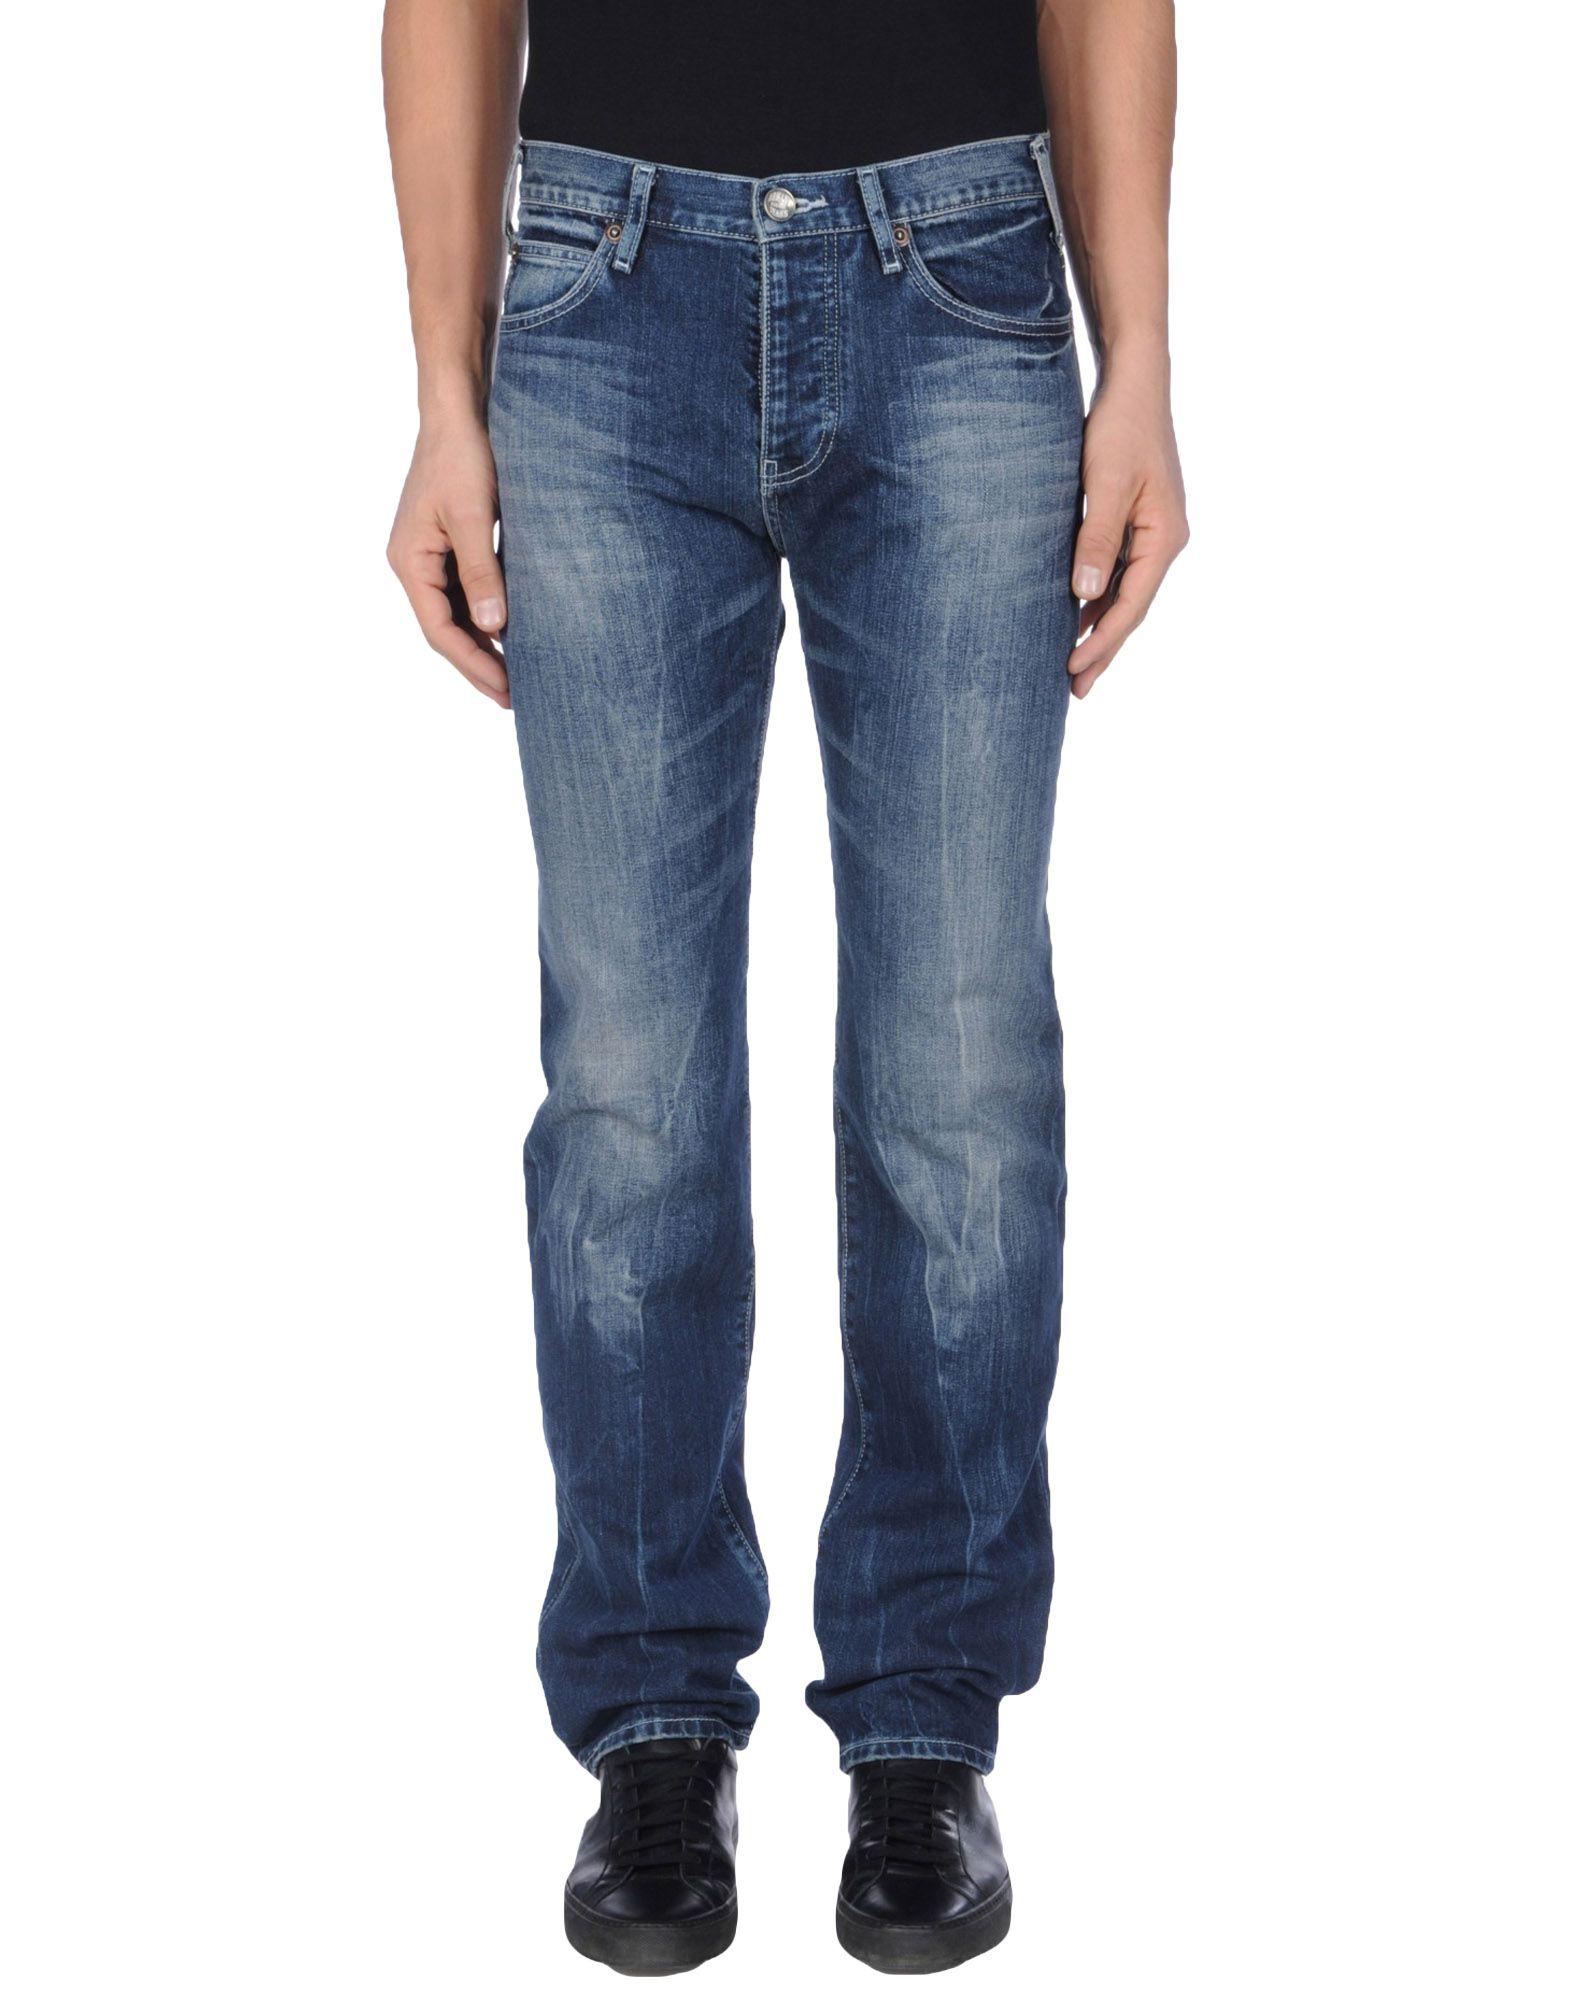 Armani jeans Denim Trousers in Blue for Men - Save 32% | Lyst